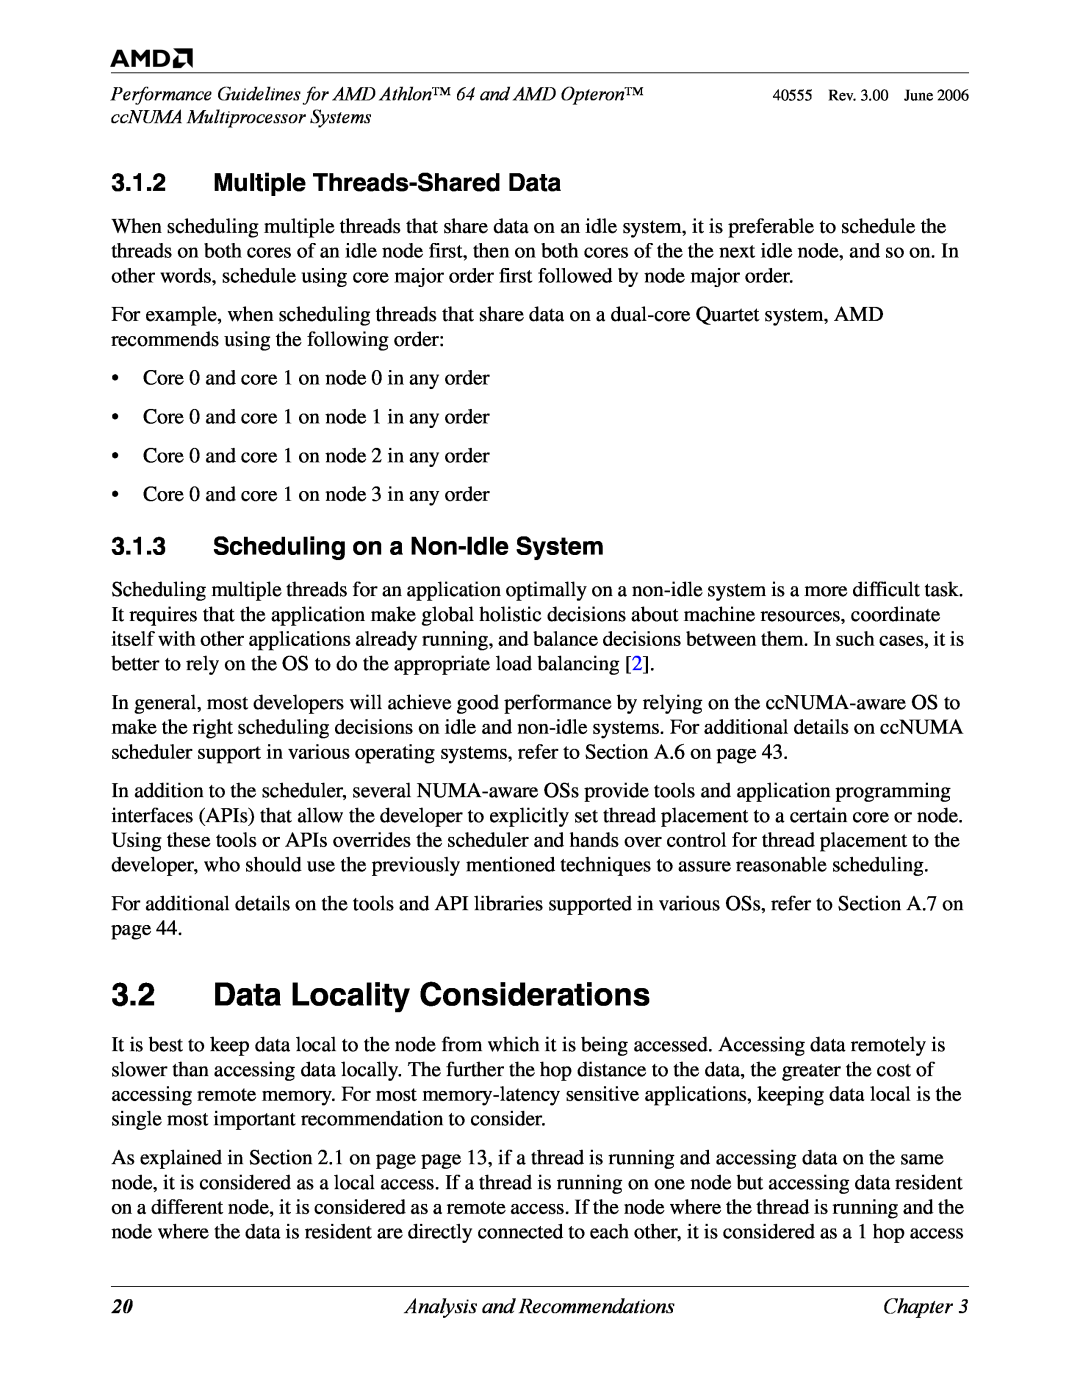 AMD 64 manual Data Locality Considerations, Multiple Threads-Shared Data, Scheduling on a Non-Idle System 